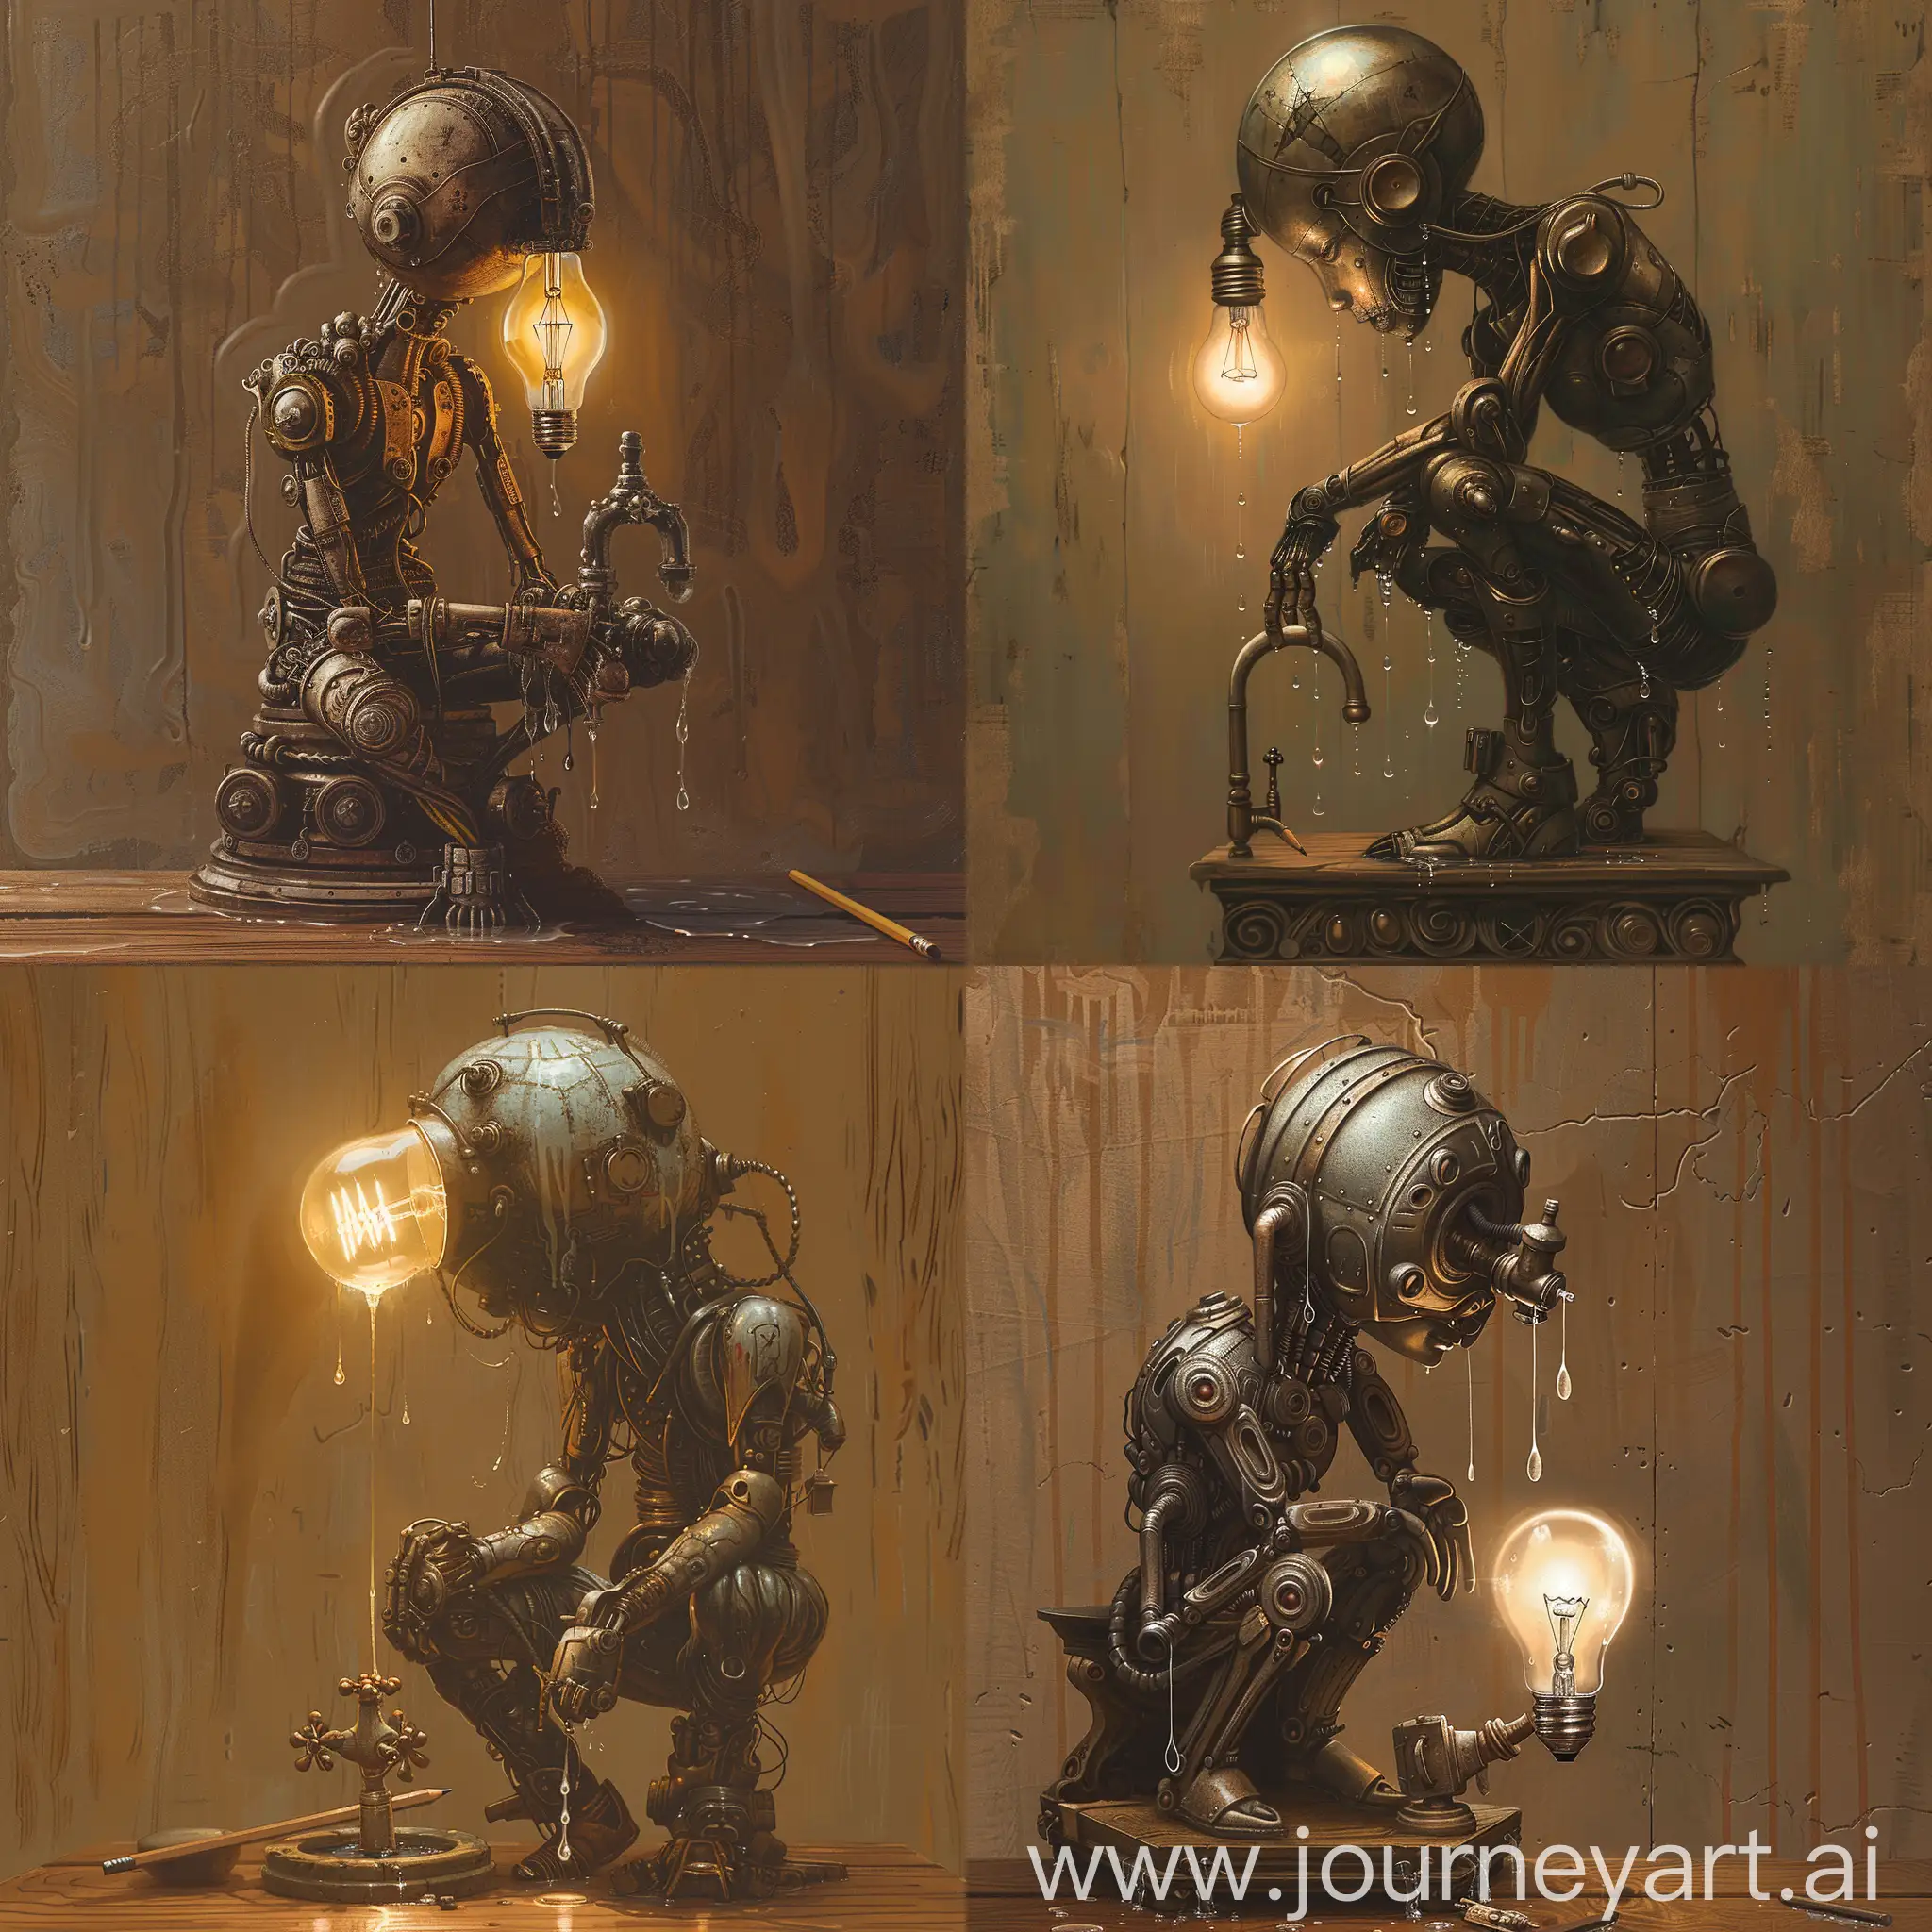 

A captivating dark fantasy illustration featuring an intricately designed metallic figure with a light bulb as its h

ead. The warm glow from the illuminated bulb casts an eerie atmosphere, while the anthropomorphic form, adorned with vintage elements, sits on a decorative base. Clutching a faucet, water droplets drip down, adding to the mysterious ambiance. The muted brown background and wooden surface with a solitary pencil create a sense of antiquity and hint at the figure's potential creative pursuits., architecture, illustration, dark fantasy, painting